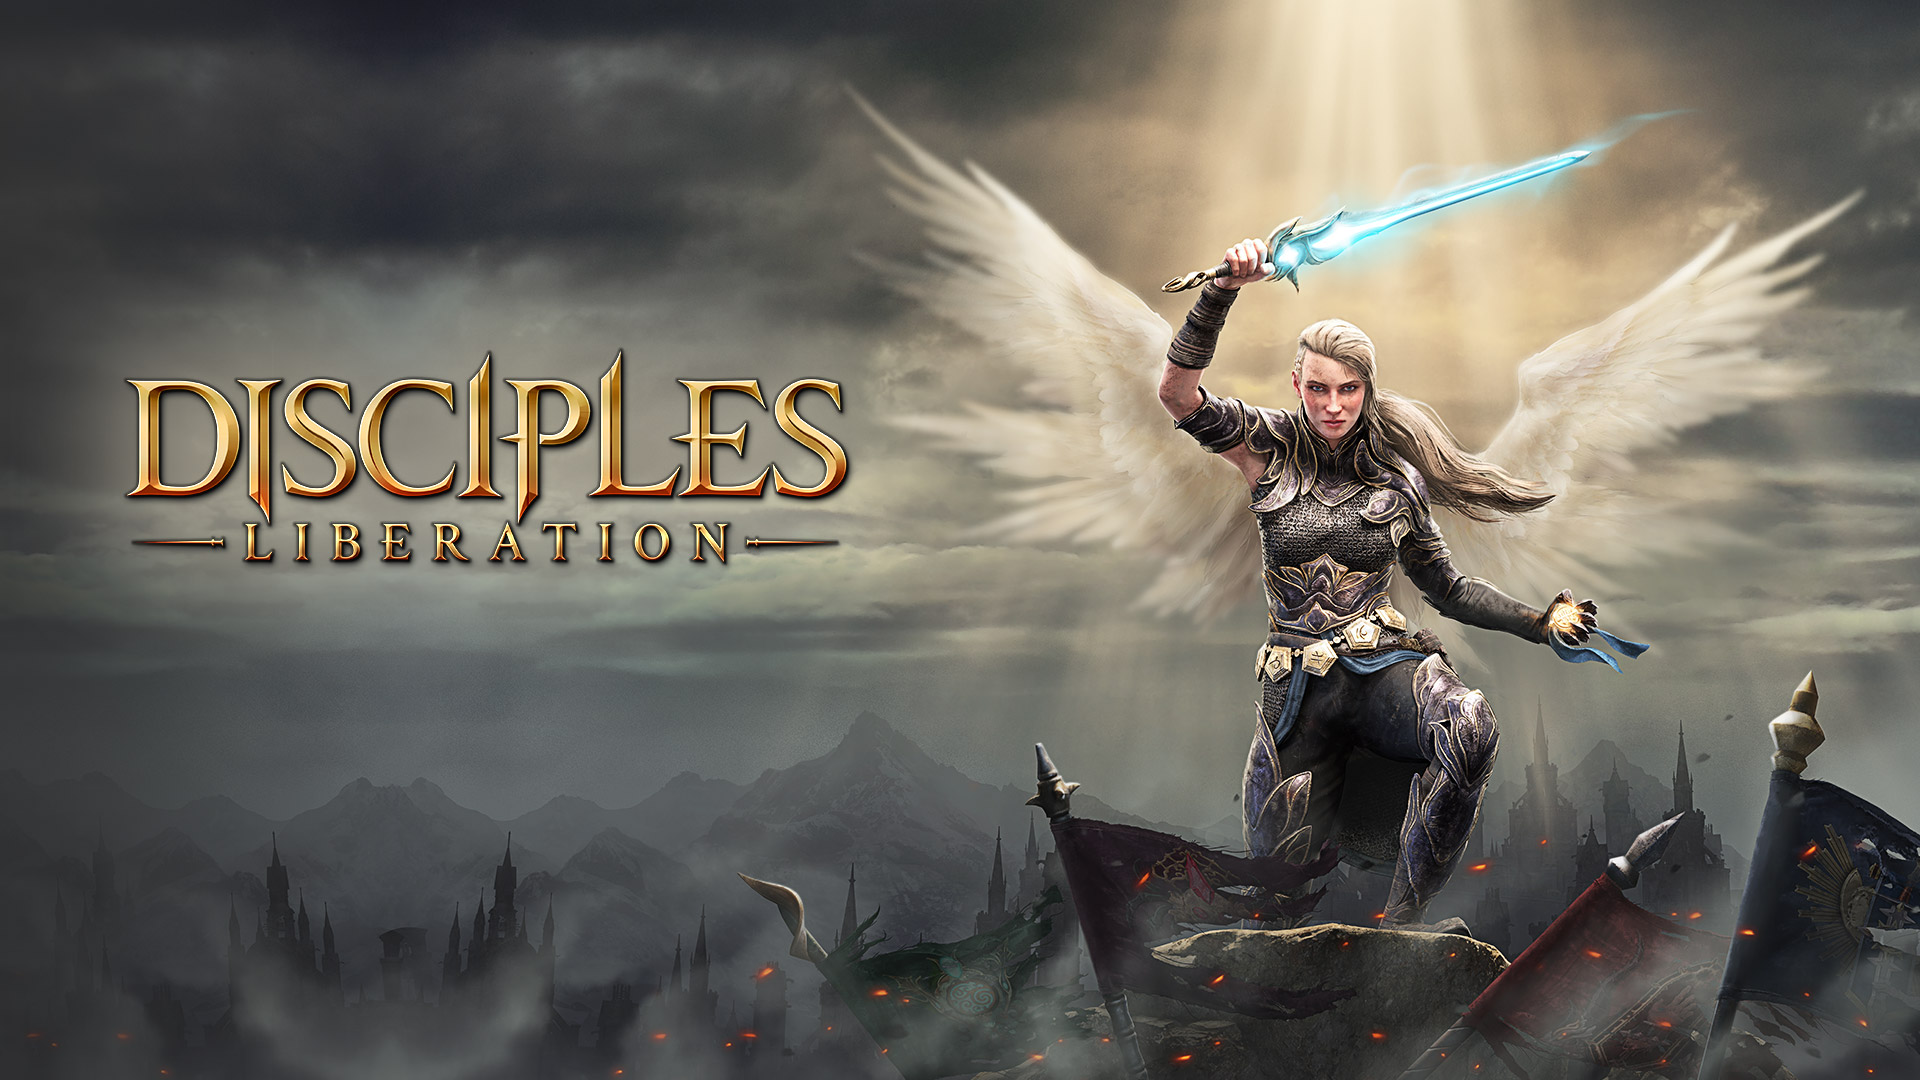 Disciples: Liberation Now Available For Pre-Order On Xbox, With Smart Delivery Support